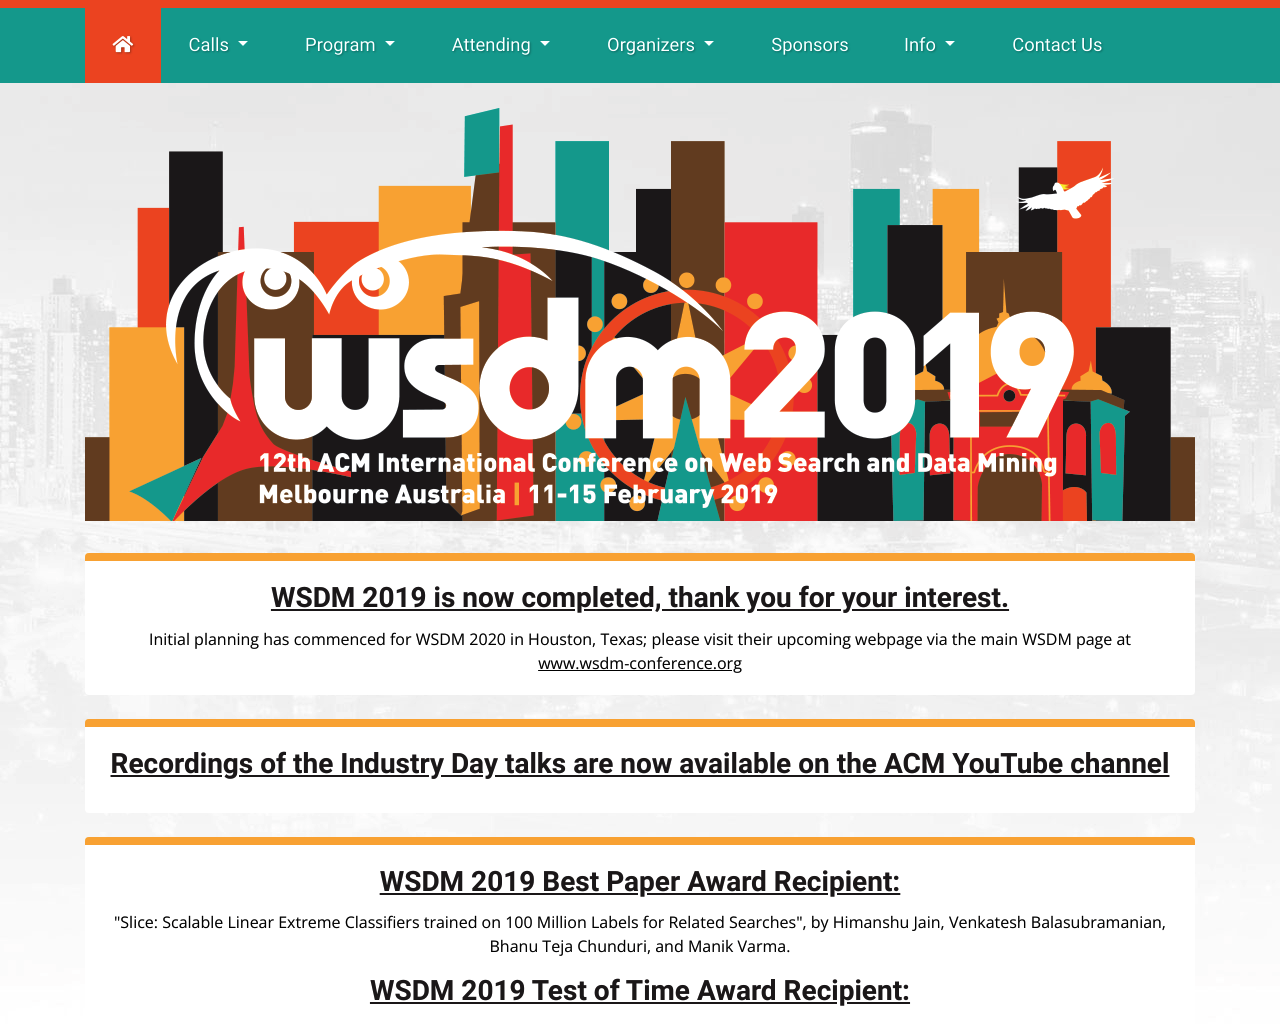 https://www.wsdm-conference.org/2019/